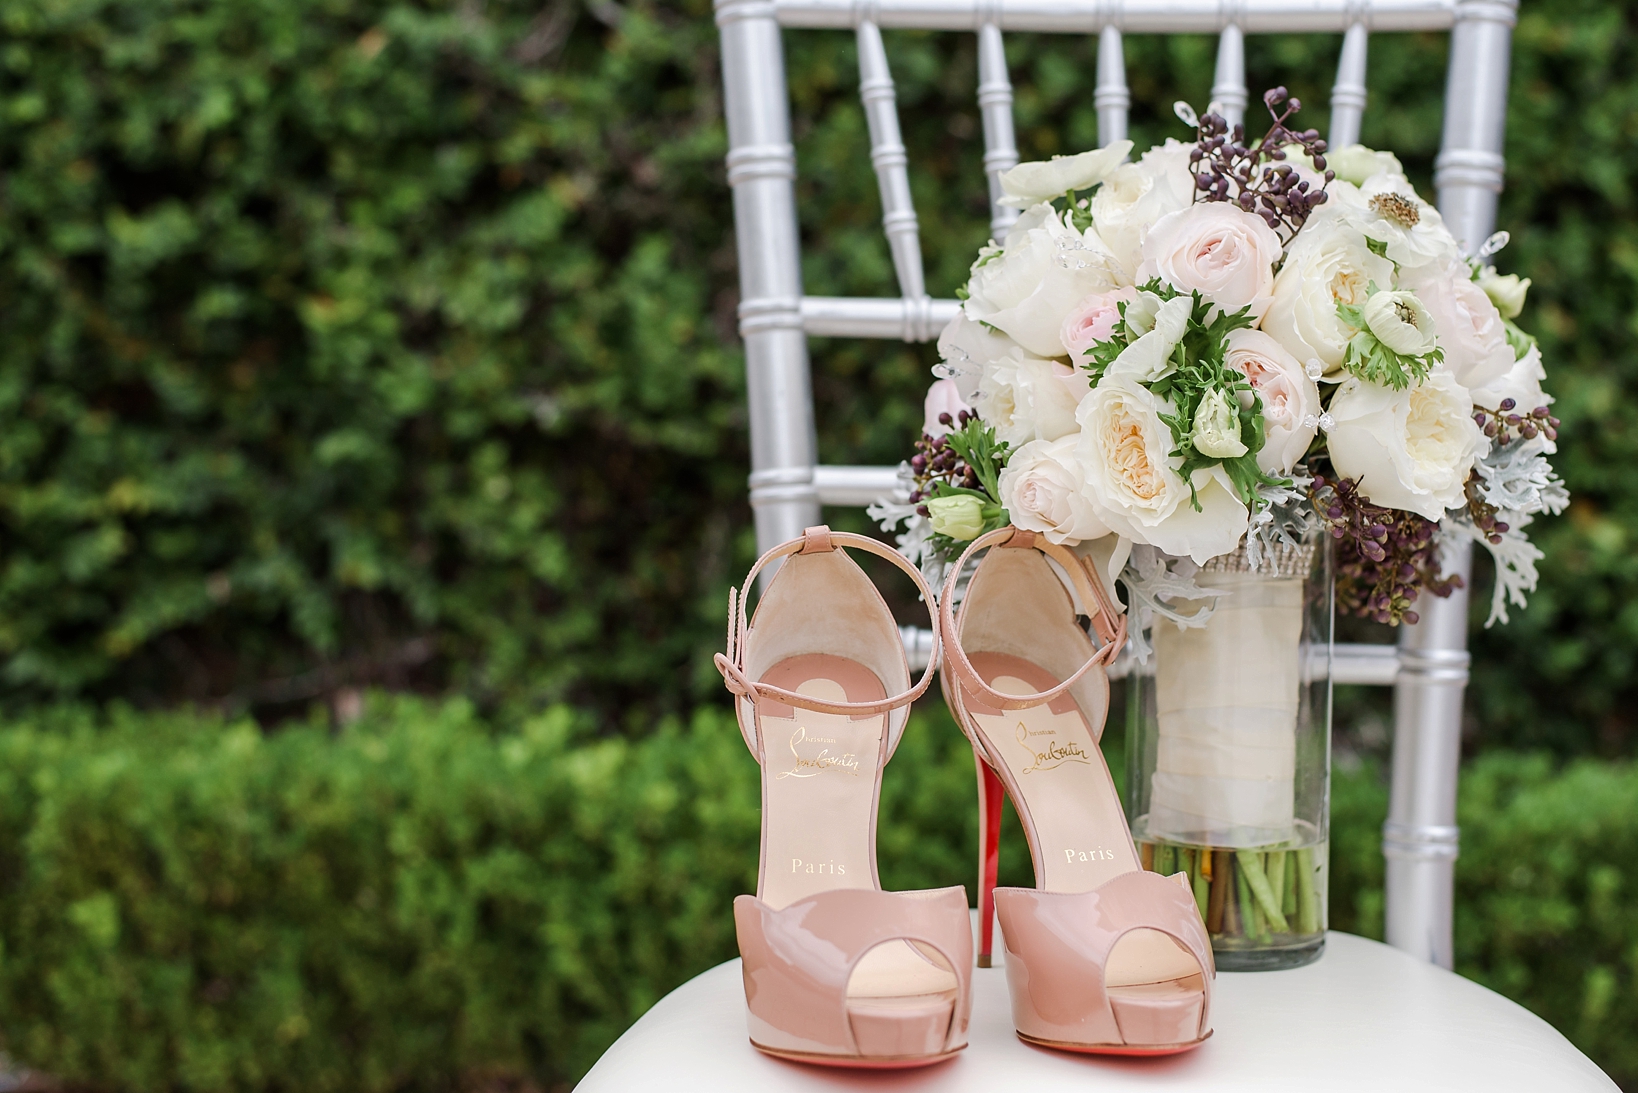 Christian Louboutin heels and a Bridal bouquet